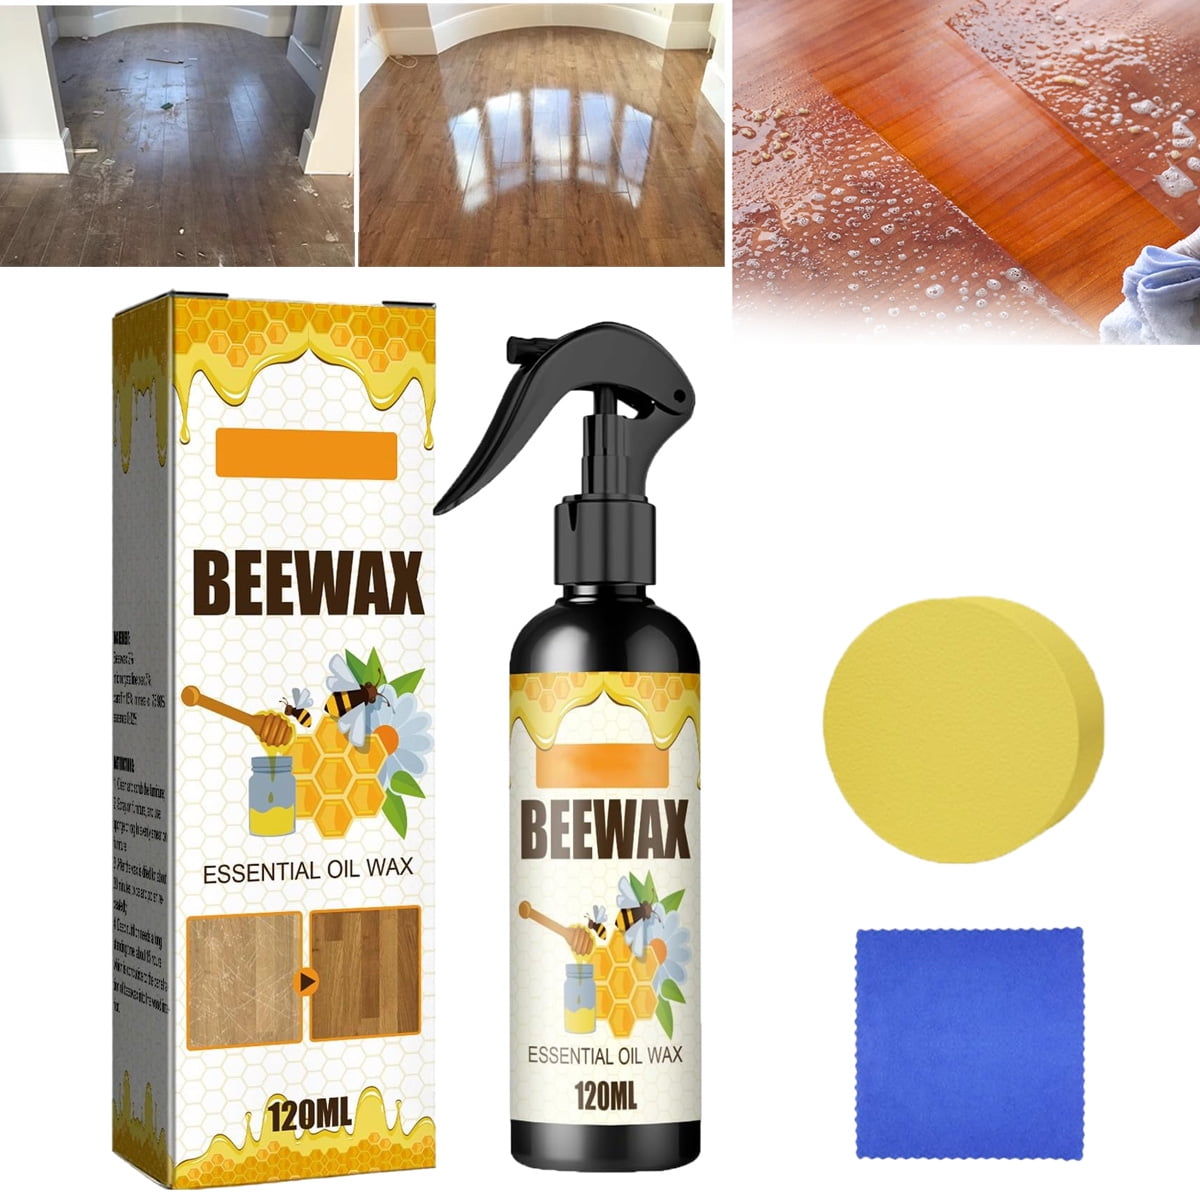  WEJDYKG Natural Micro-Molecularized Beeswax Spray, 2023 New Bees  Wax Furniture Polish and Cleaner, Bees Wax Furniture Polish and Cleaner,  Wood Seasoning Beewax Spray, Antique Furniture Cleaner (1Pc) : Health &  Household